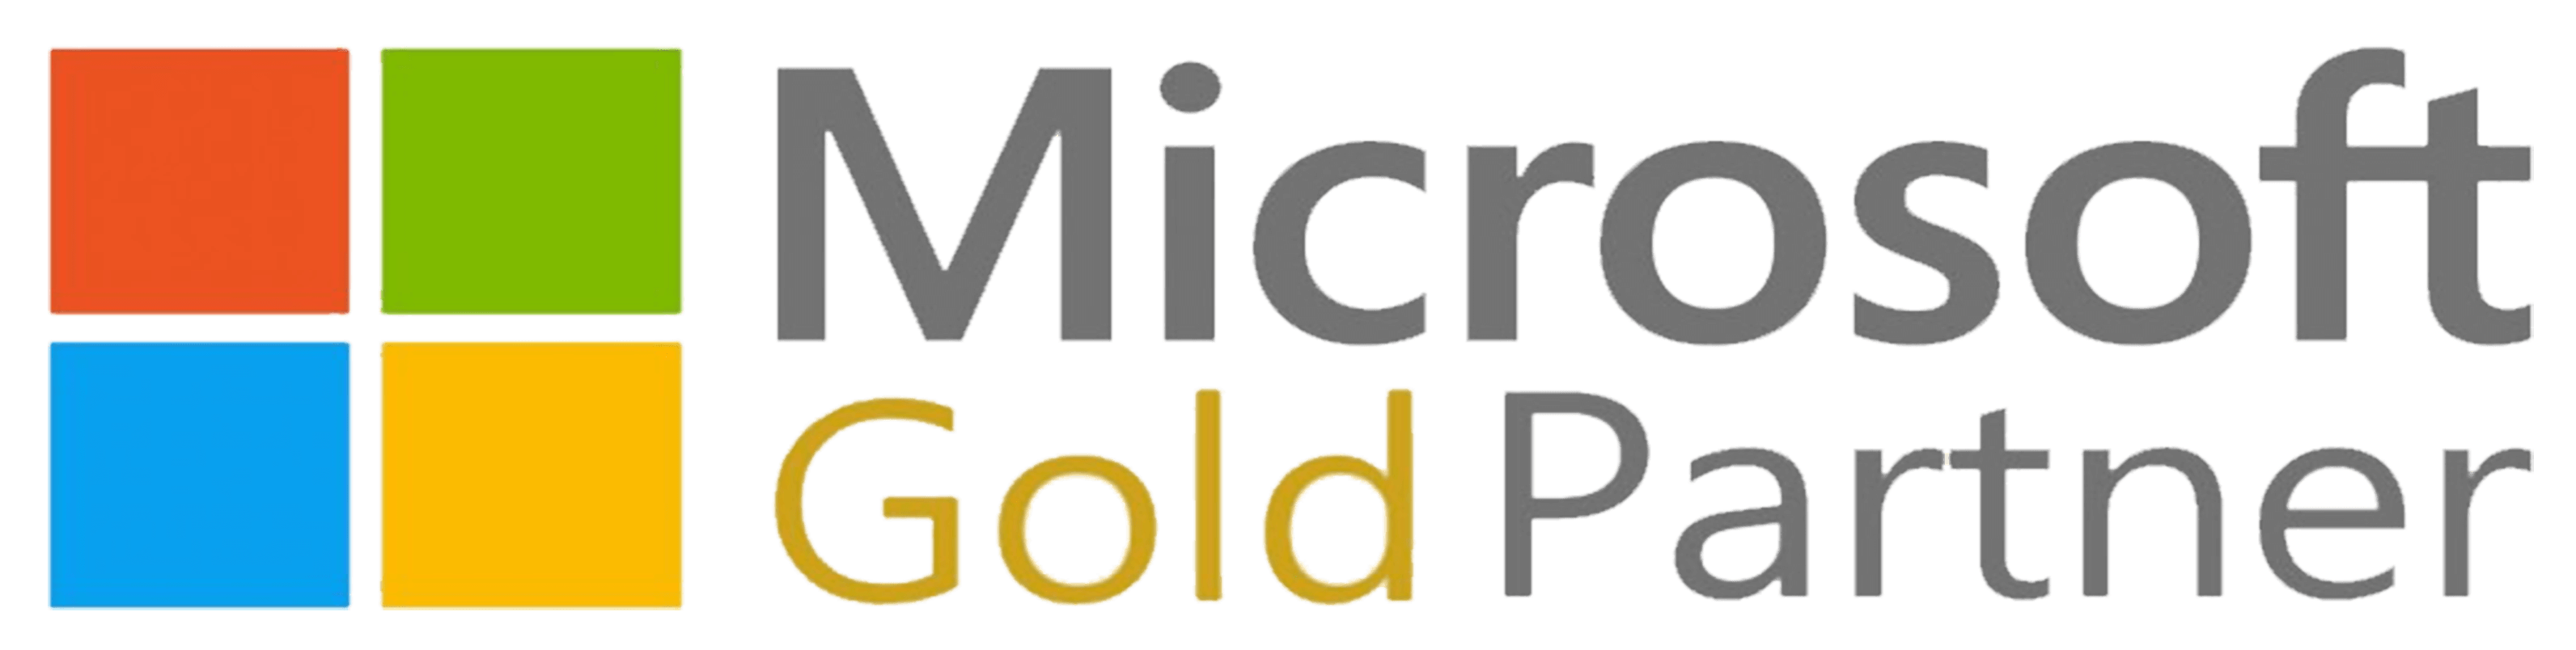 We are a Microsoft Gold Partner.